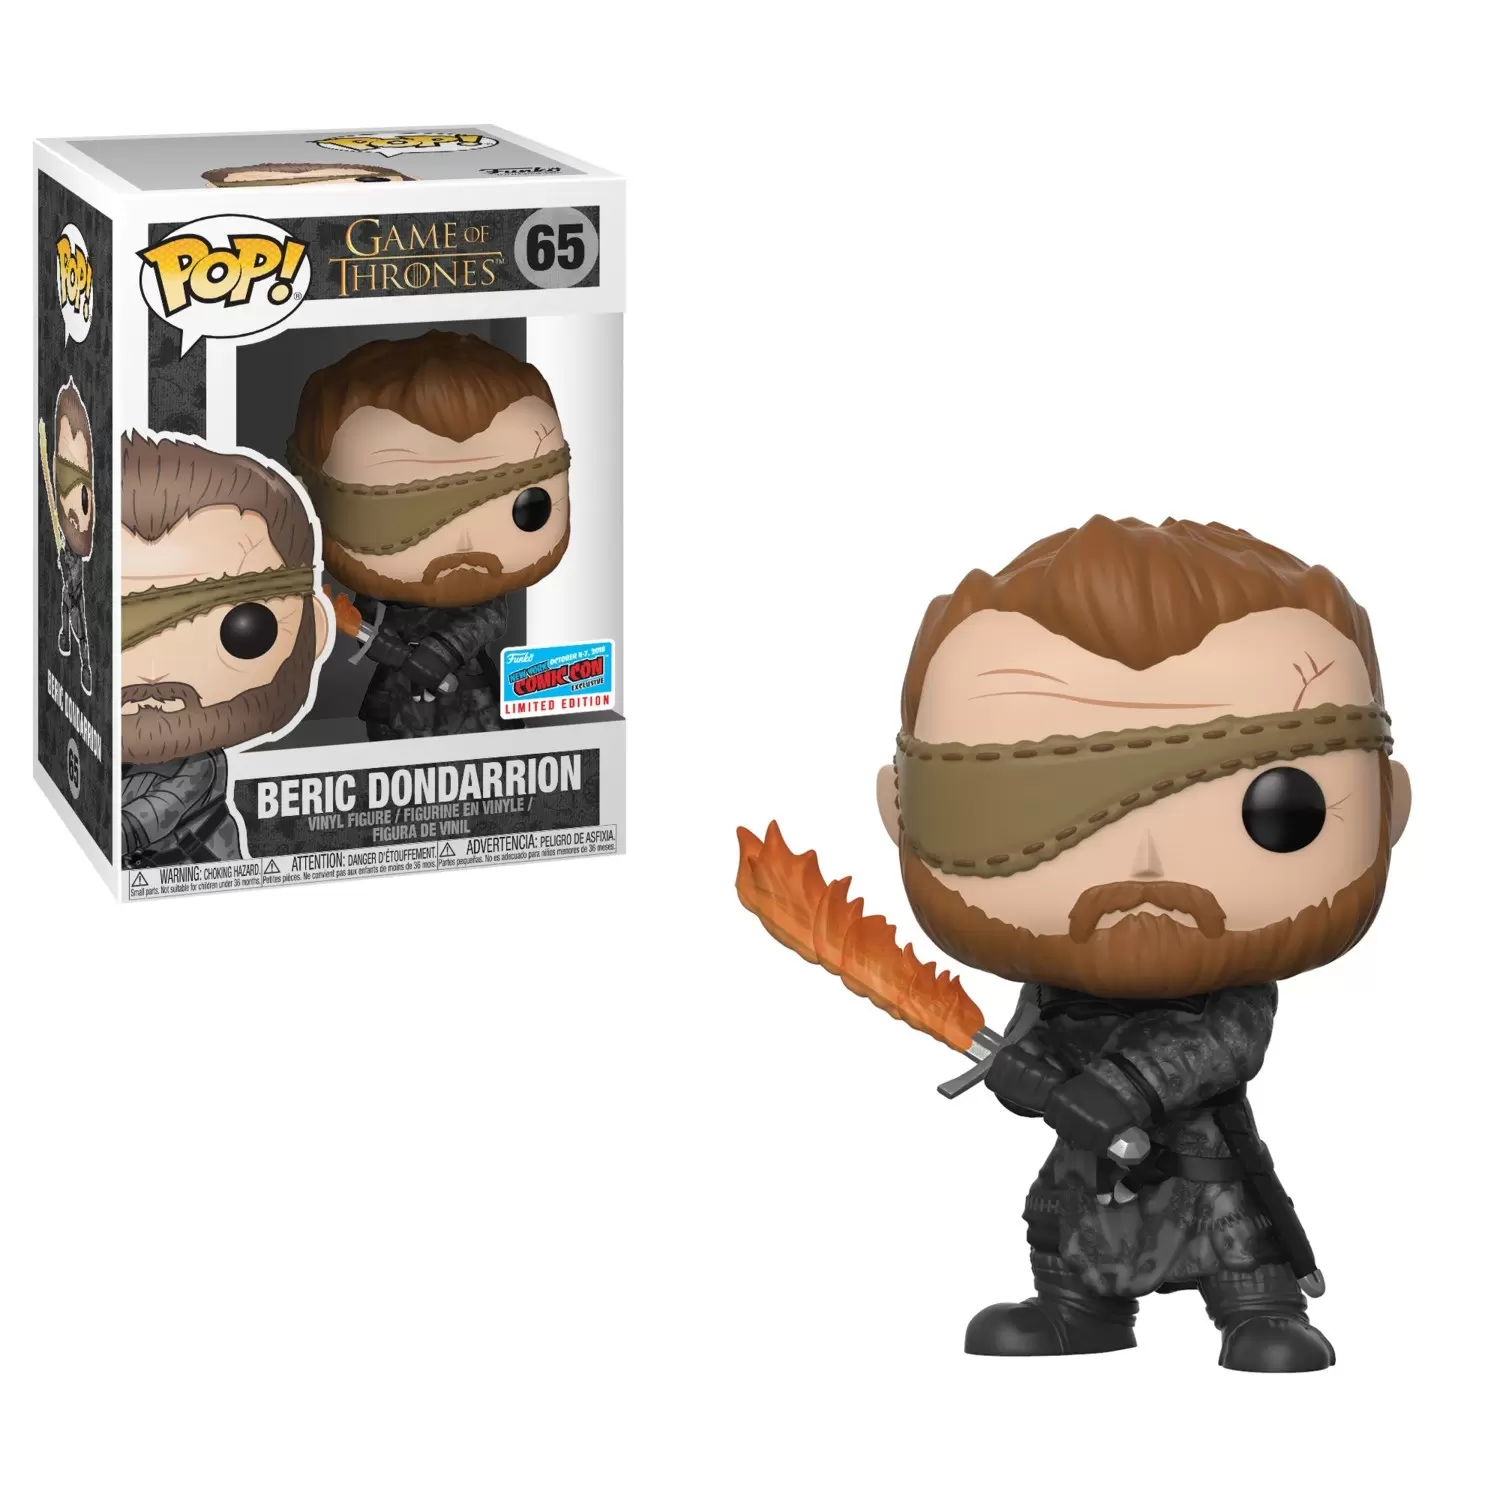 POP! Game of Thrones - Game of Thrones - Beric Dondarrion